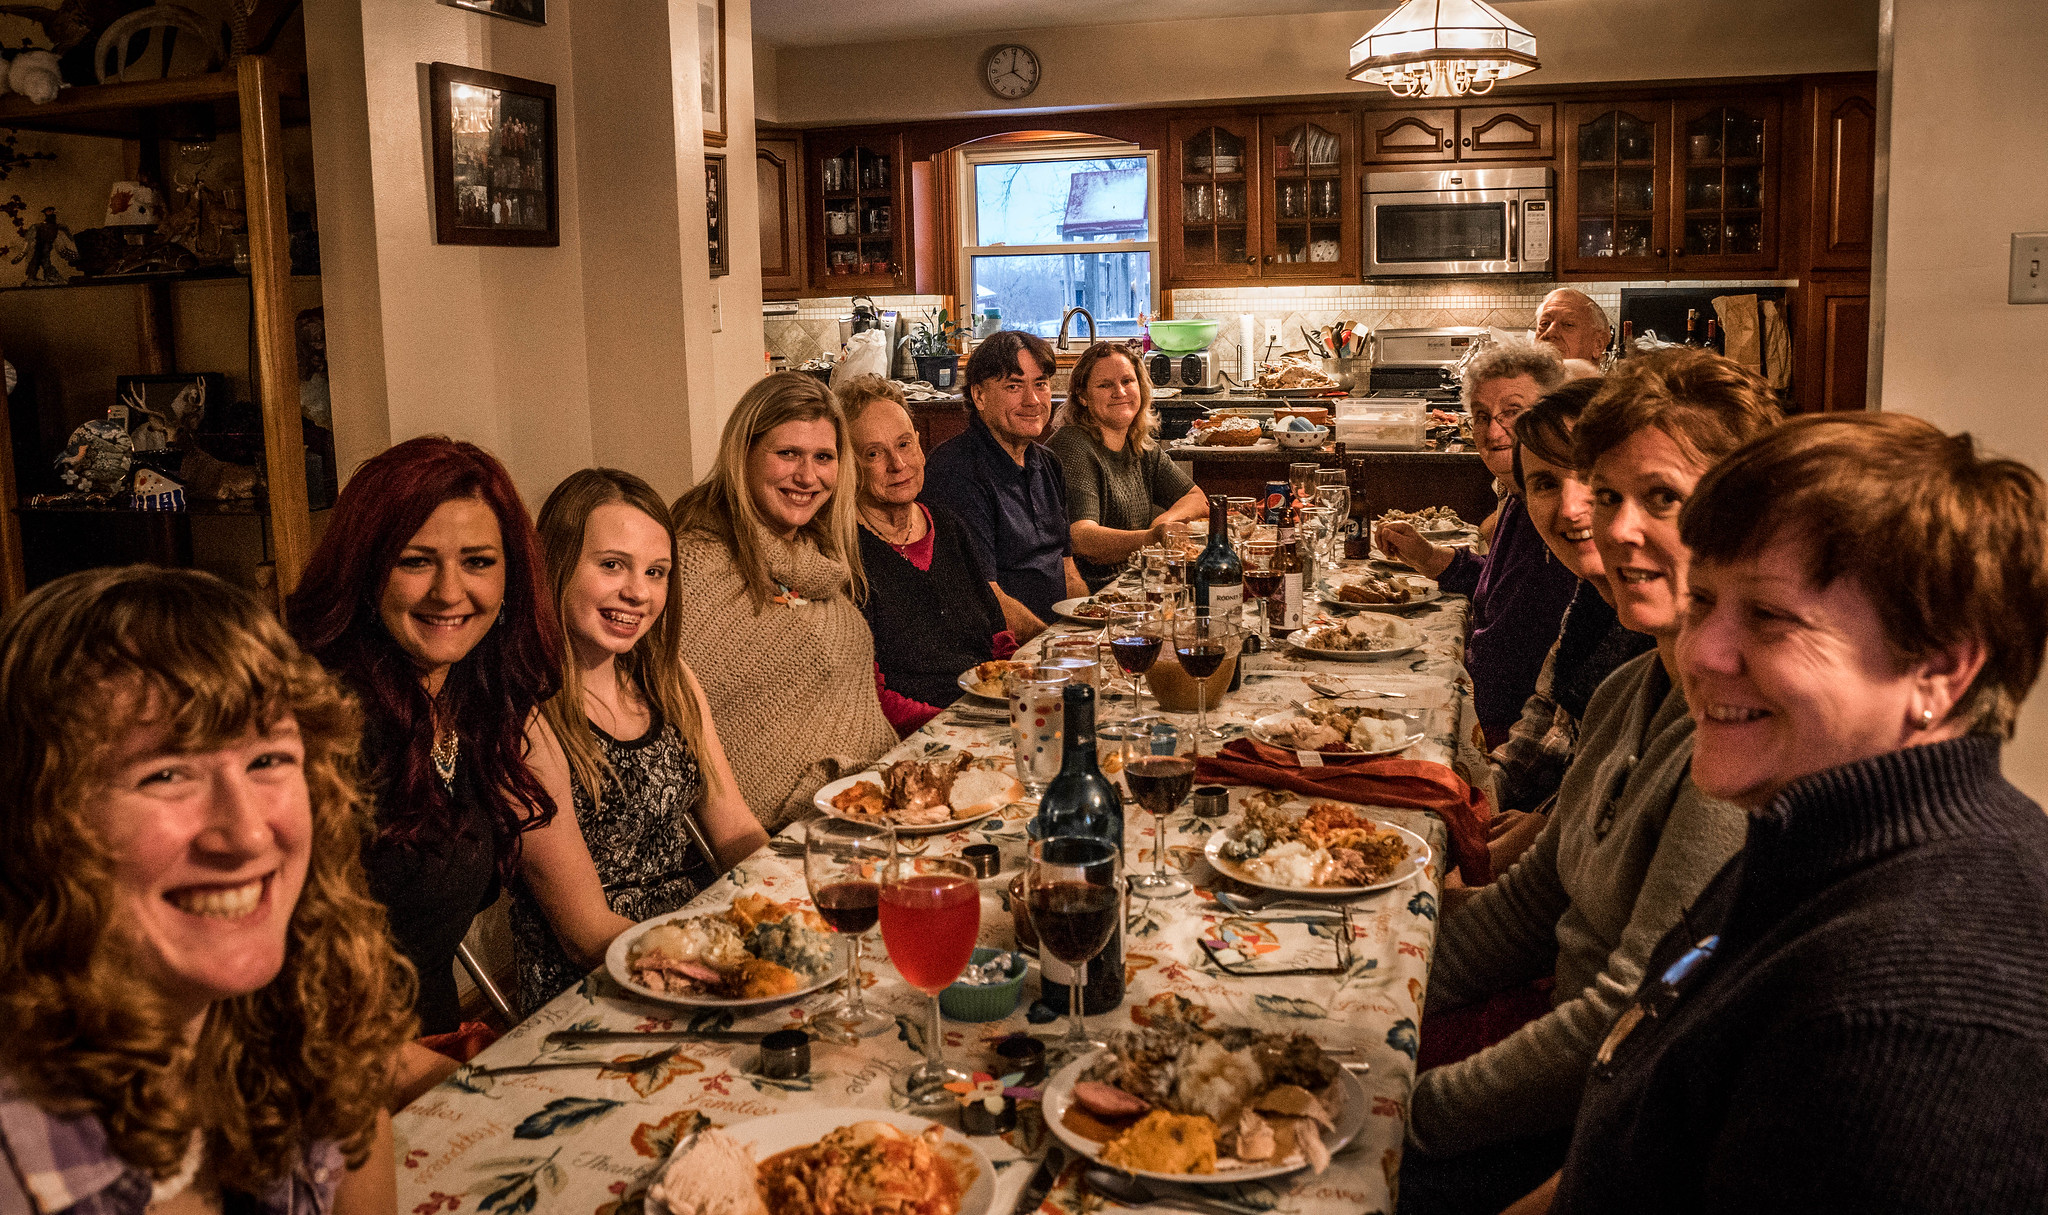 Family members gathered for Thanksgiving dinner | Source: Flickr